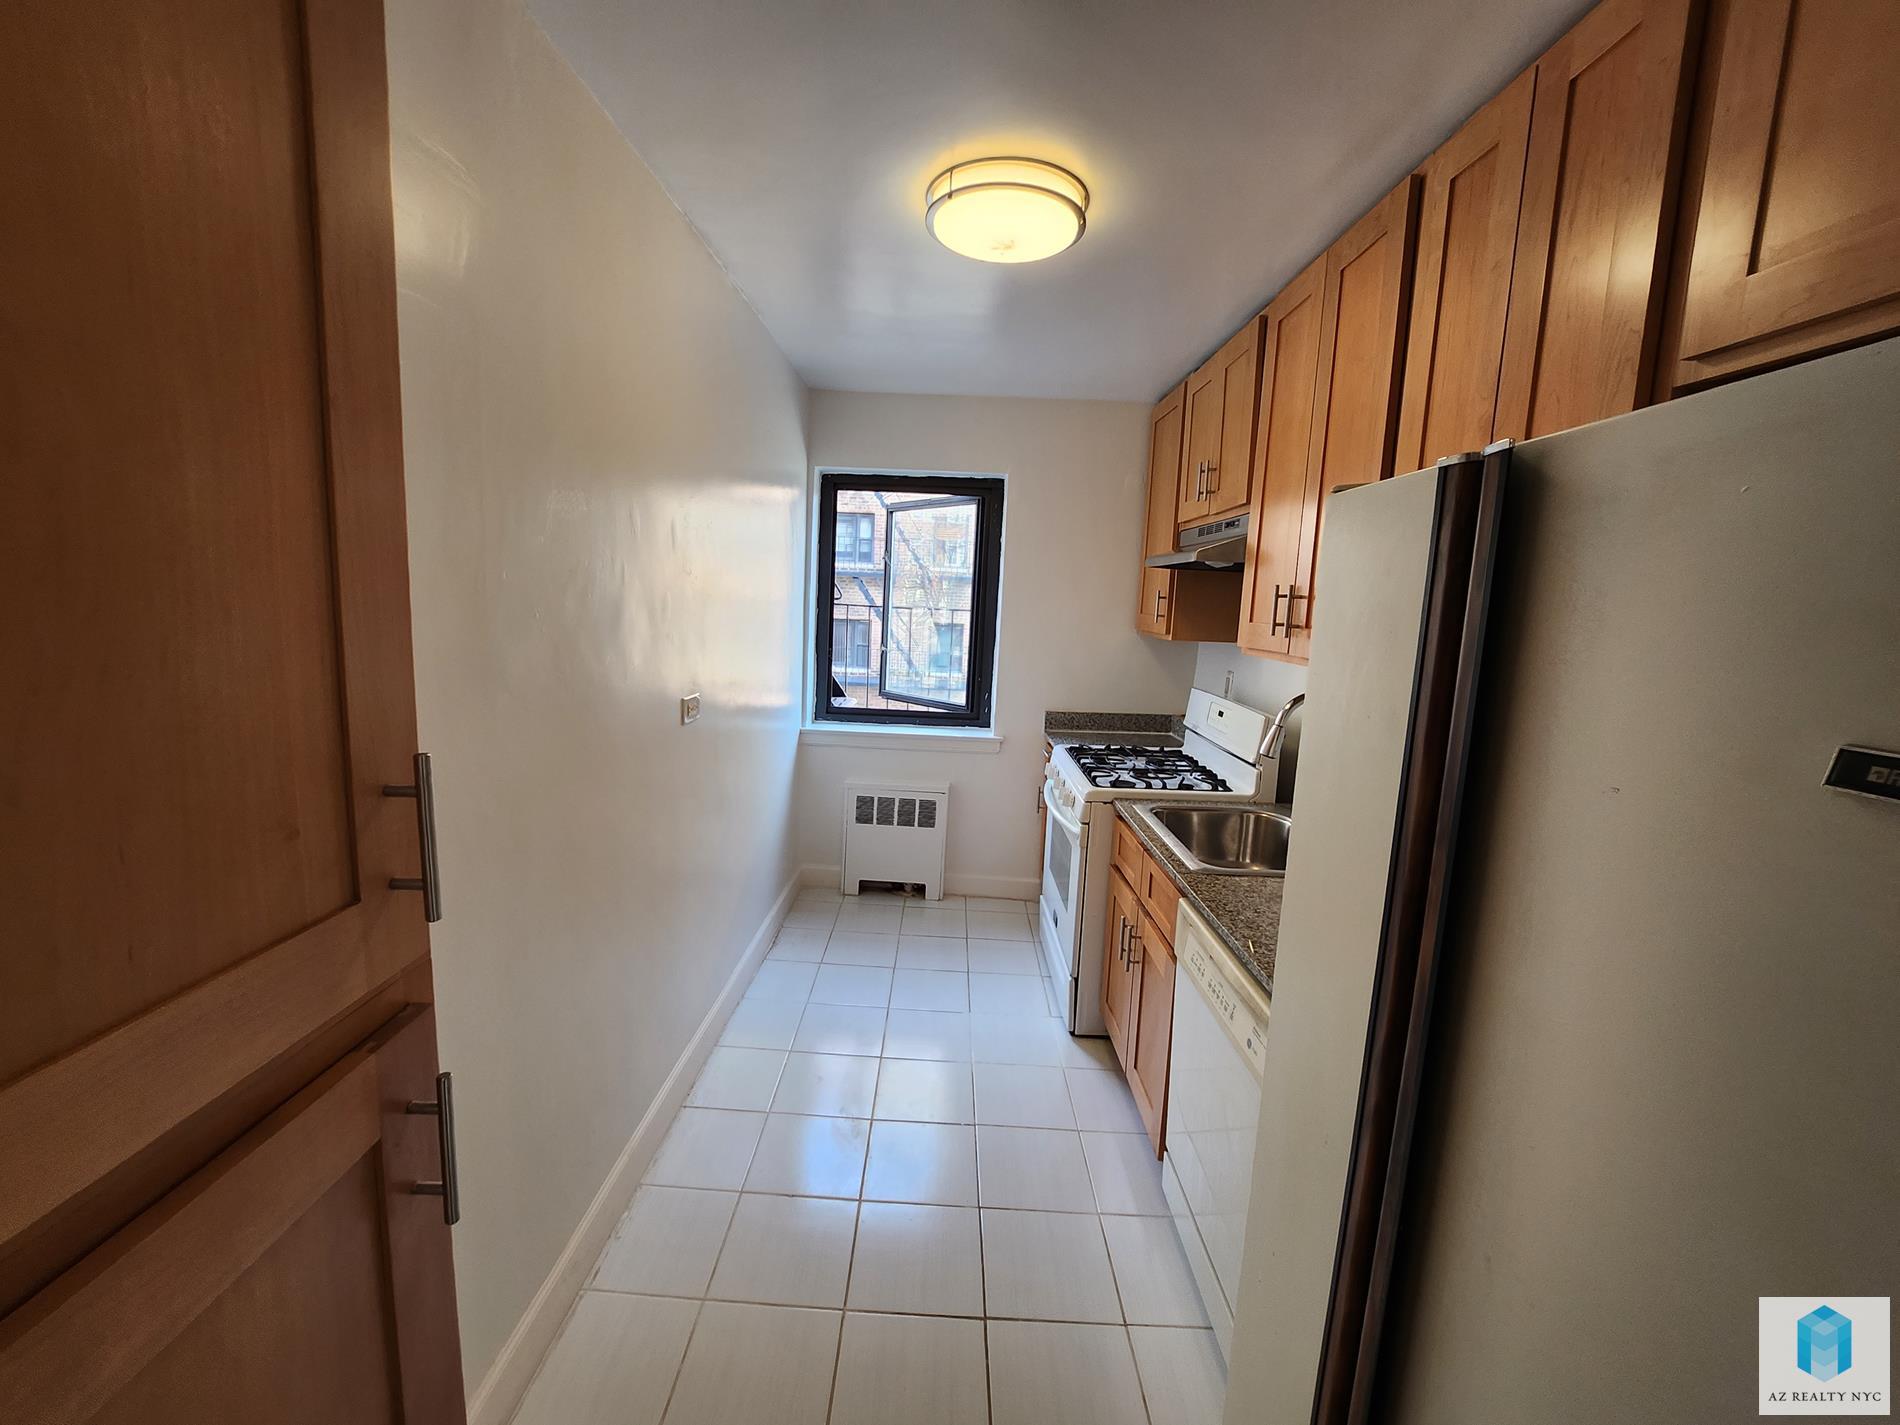 34-11 93rd Street 3-C Jackson Heights Queens NY 11372